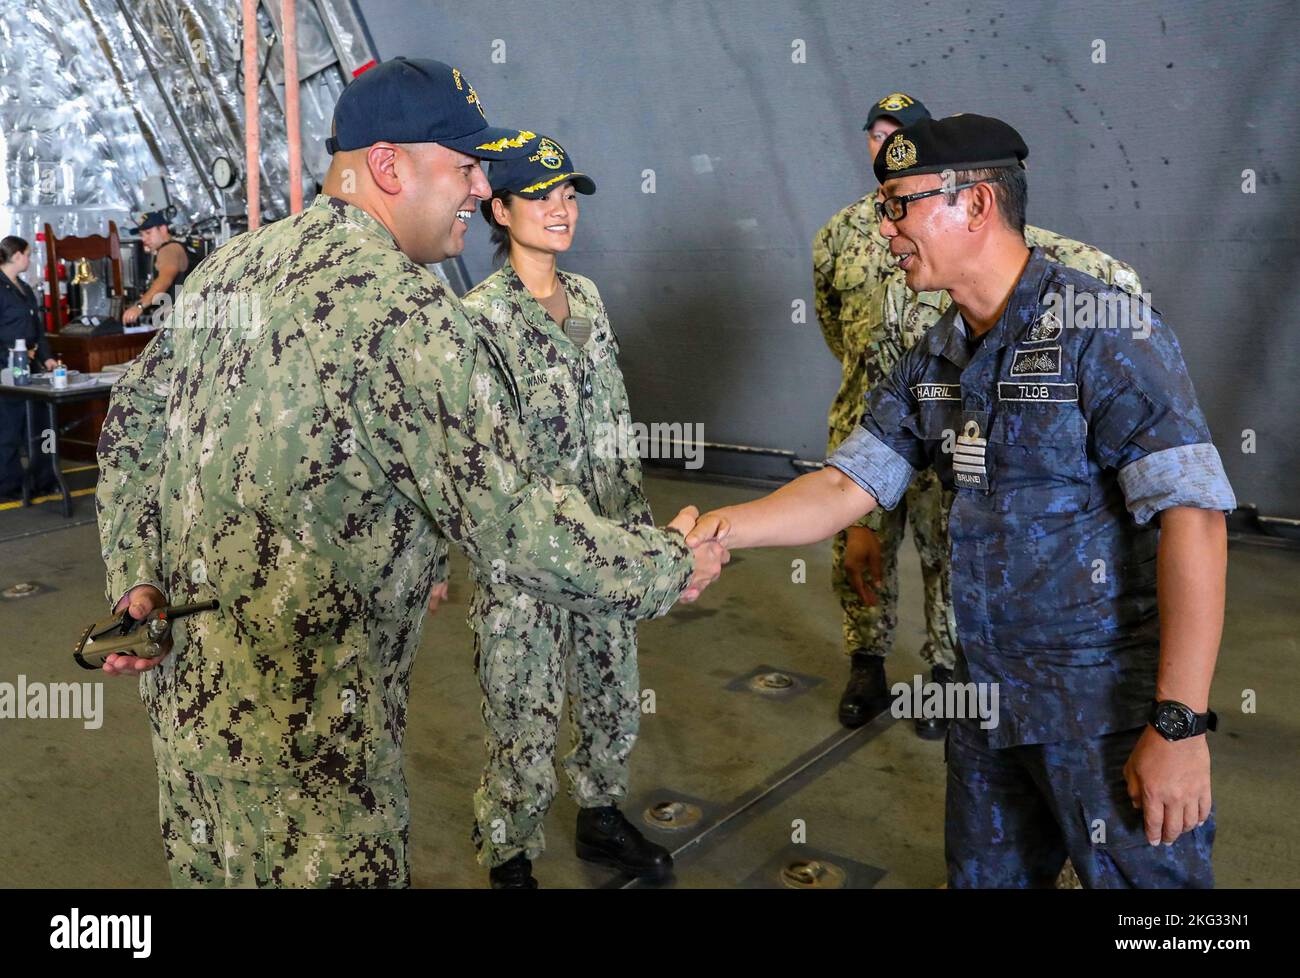 221026-N-FO714-1006  MUARA, Brunei (Oct. 26, 2022) Cmdr. Clayton Beas, commanding officer of Independence-class littoral combat ship USS Charleston (LCS 18), and Cmdr. Nellie Wang, executive officer of Charleston, welcome Capt. Khairil bin Haji Abdul Rahman, fleet commander, Royal Brunei Navy, aboard the ship during Cooperation Afloat Readiness and Training (CARAT) Brunei, Oct. 26. CARAT Brunei 2022 highlights the 28th anniversary of CARAT among Allies and partners as a way to demonstrate long-term commitment to strengthening relationships throughout South and Southeast Asia and to highlight U Stock Photo